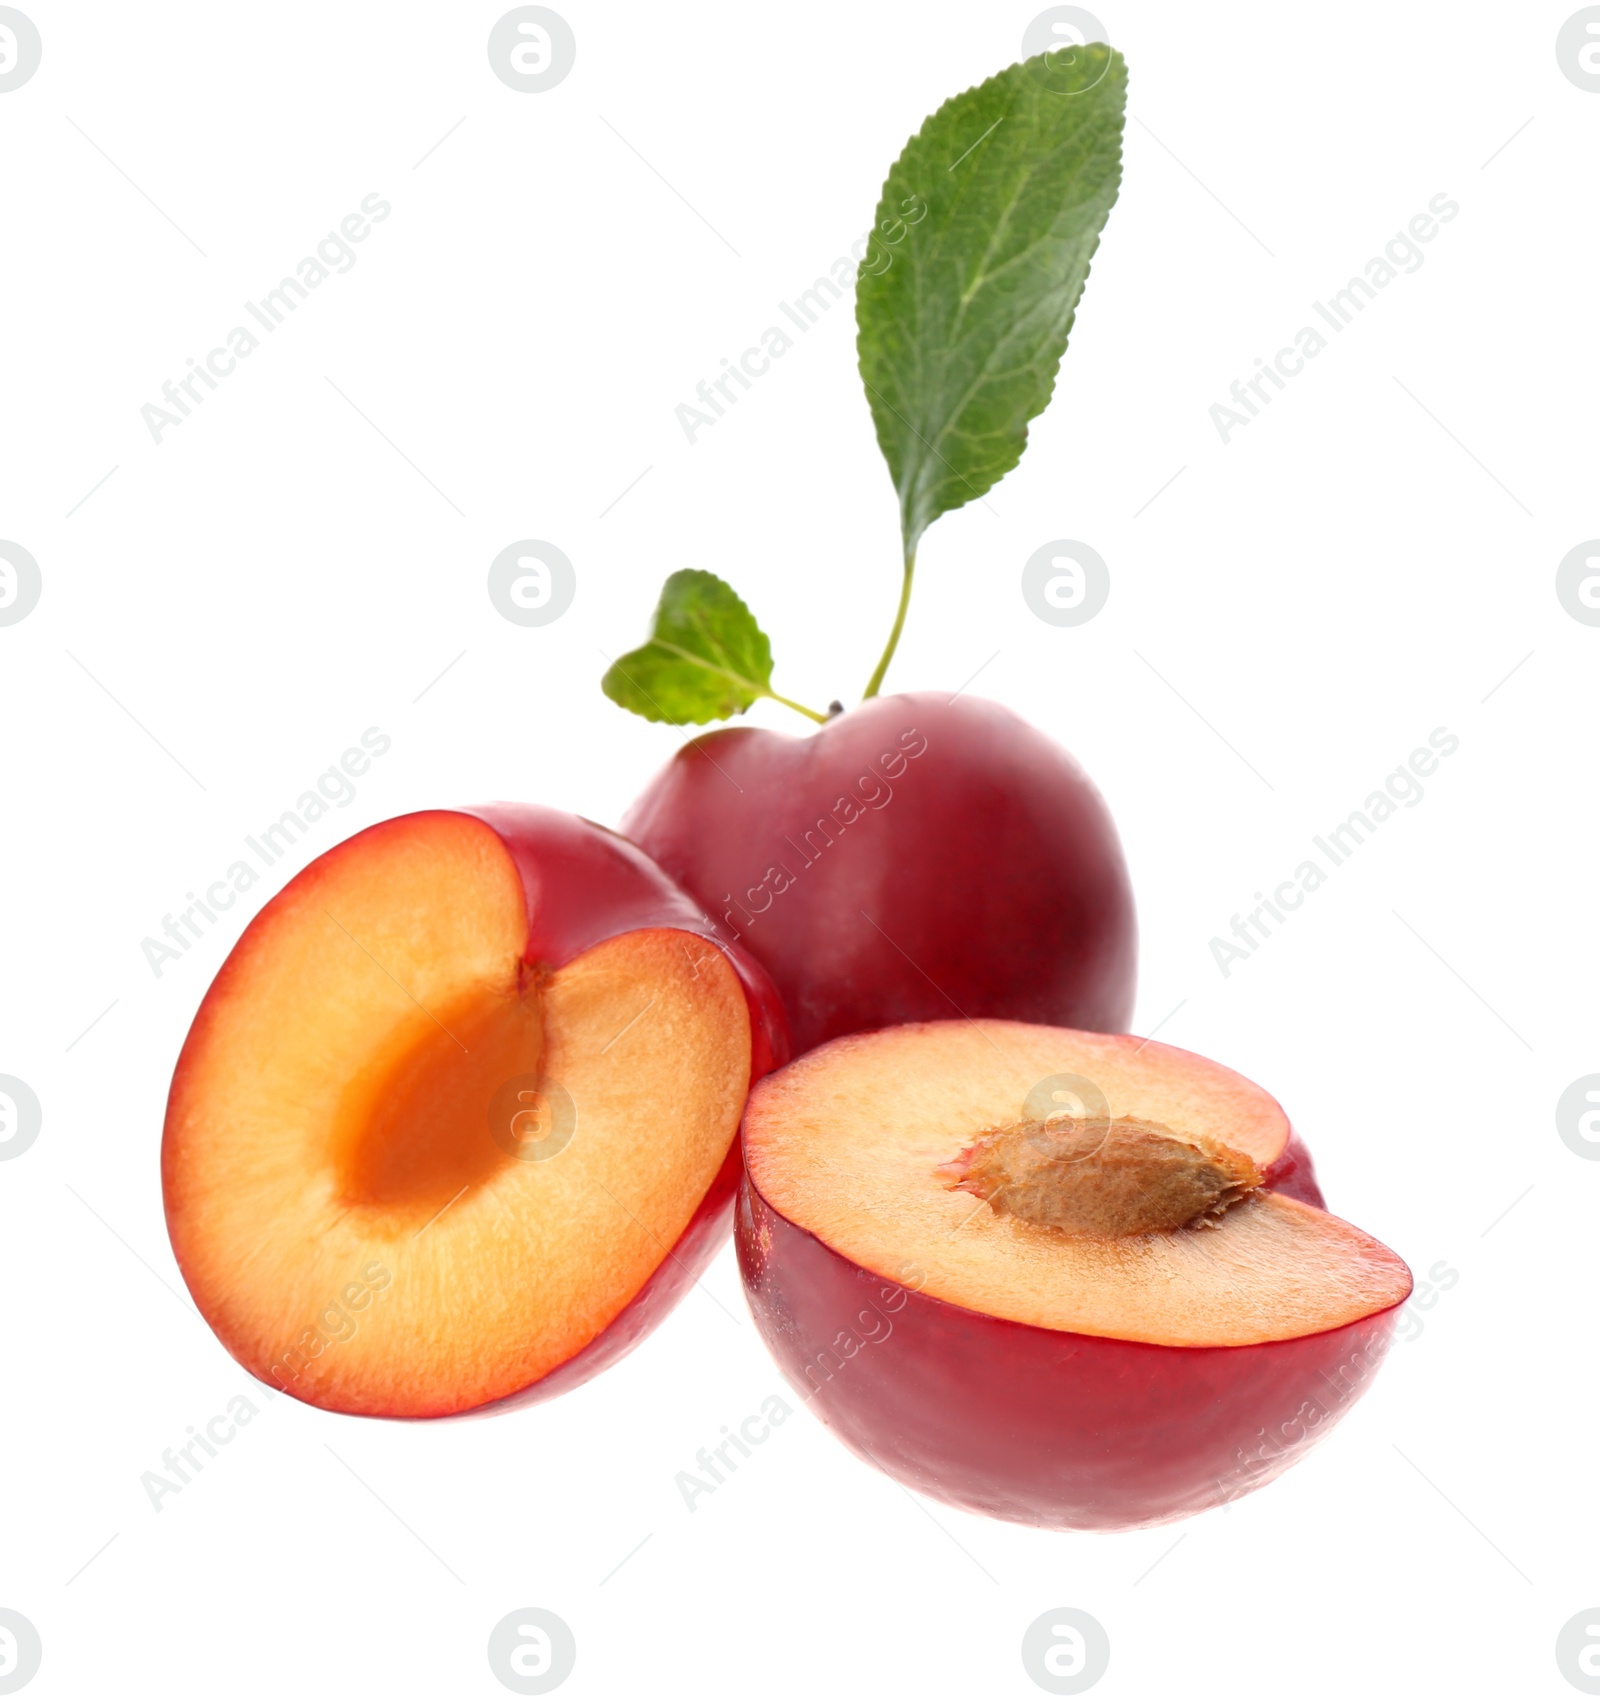 Photo of Whole and cut ripe plums with green leaves isolated on white